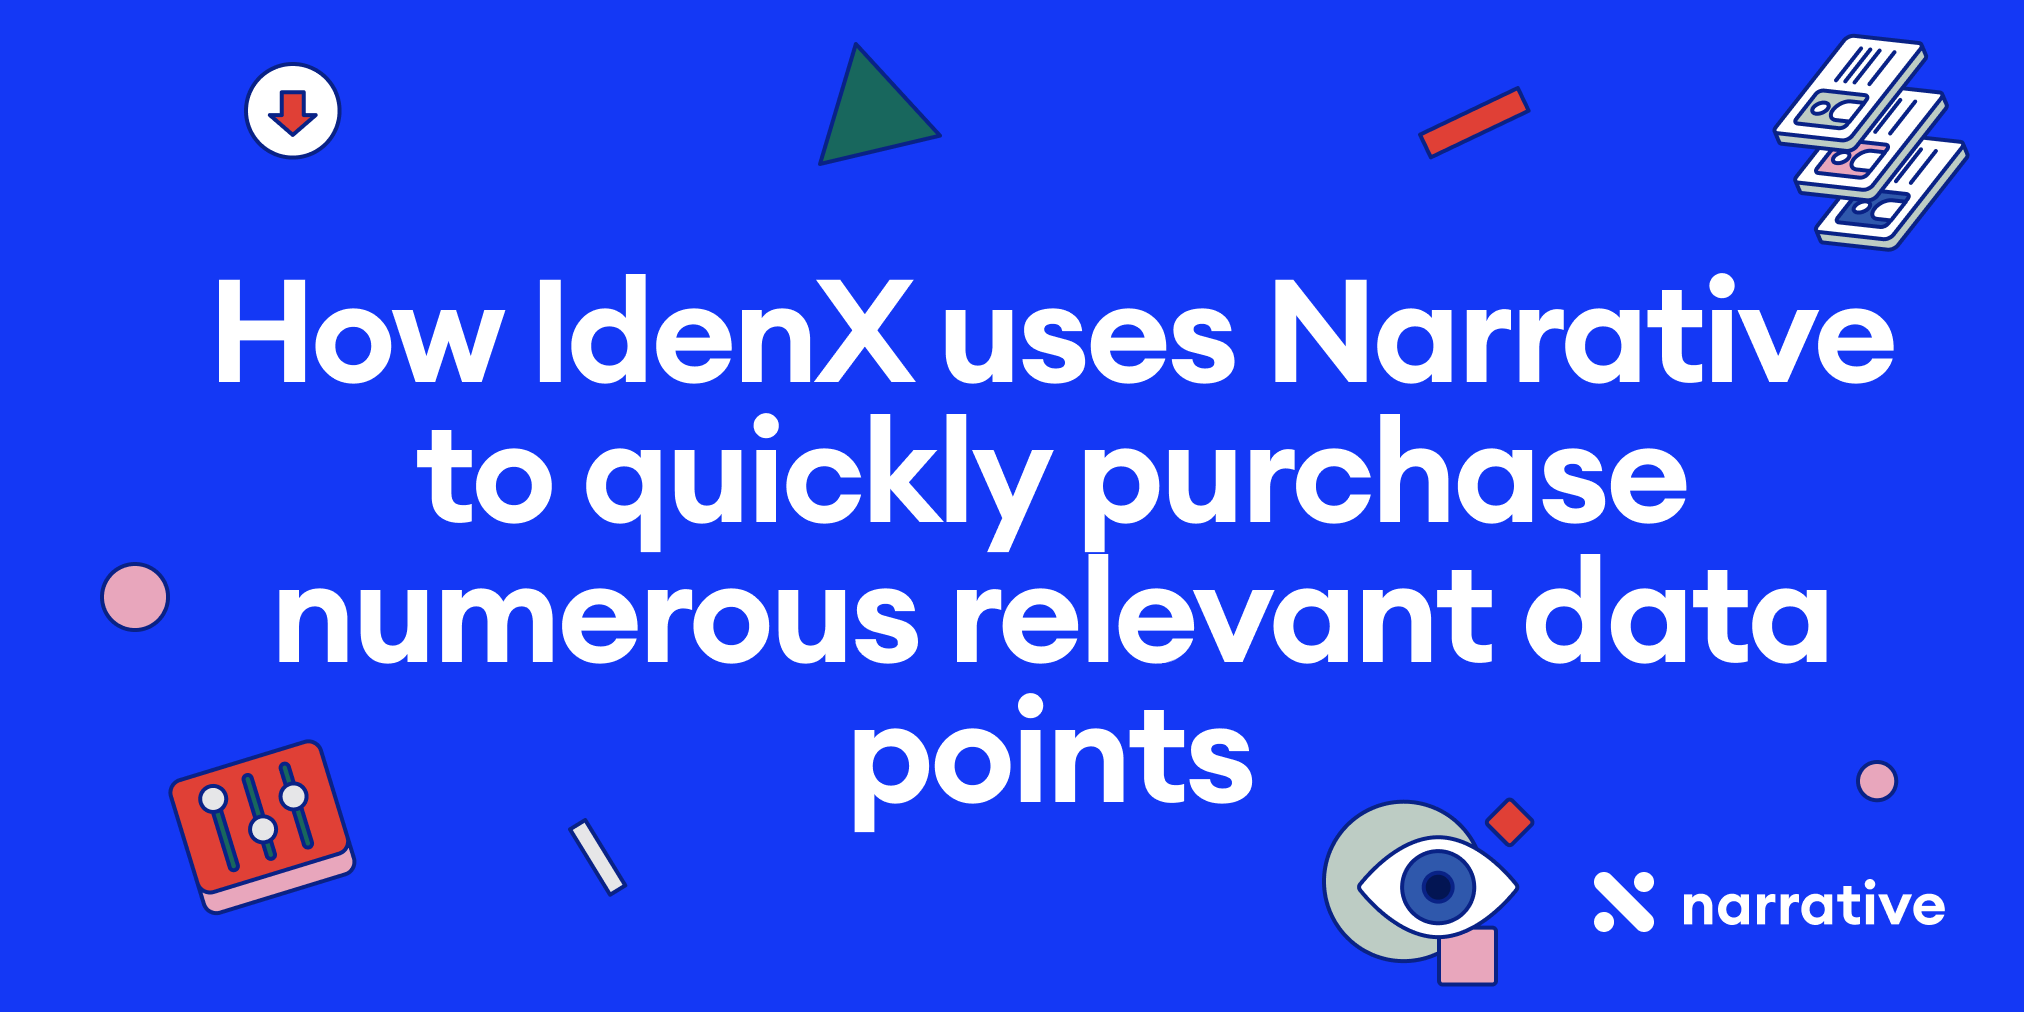 How IdenX uses Narrative to quickly purchase numerous relevant data points